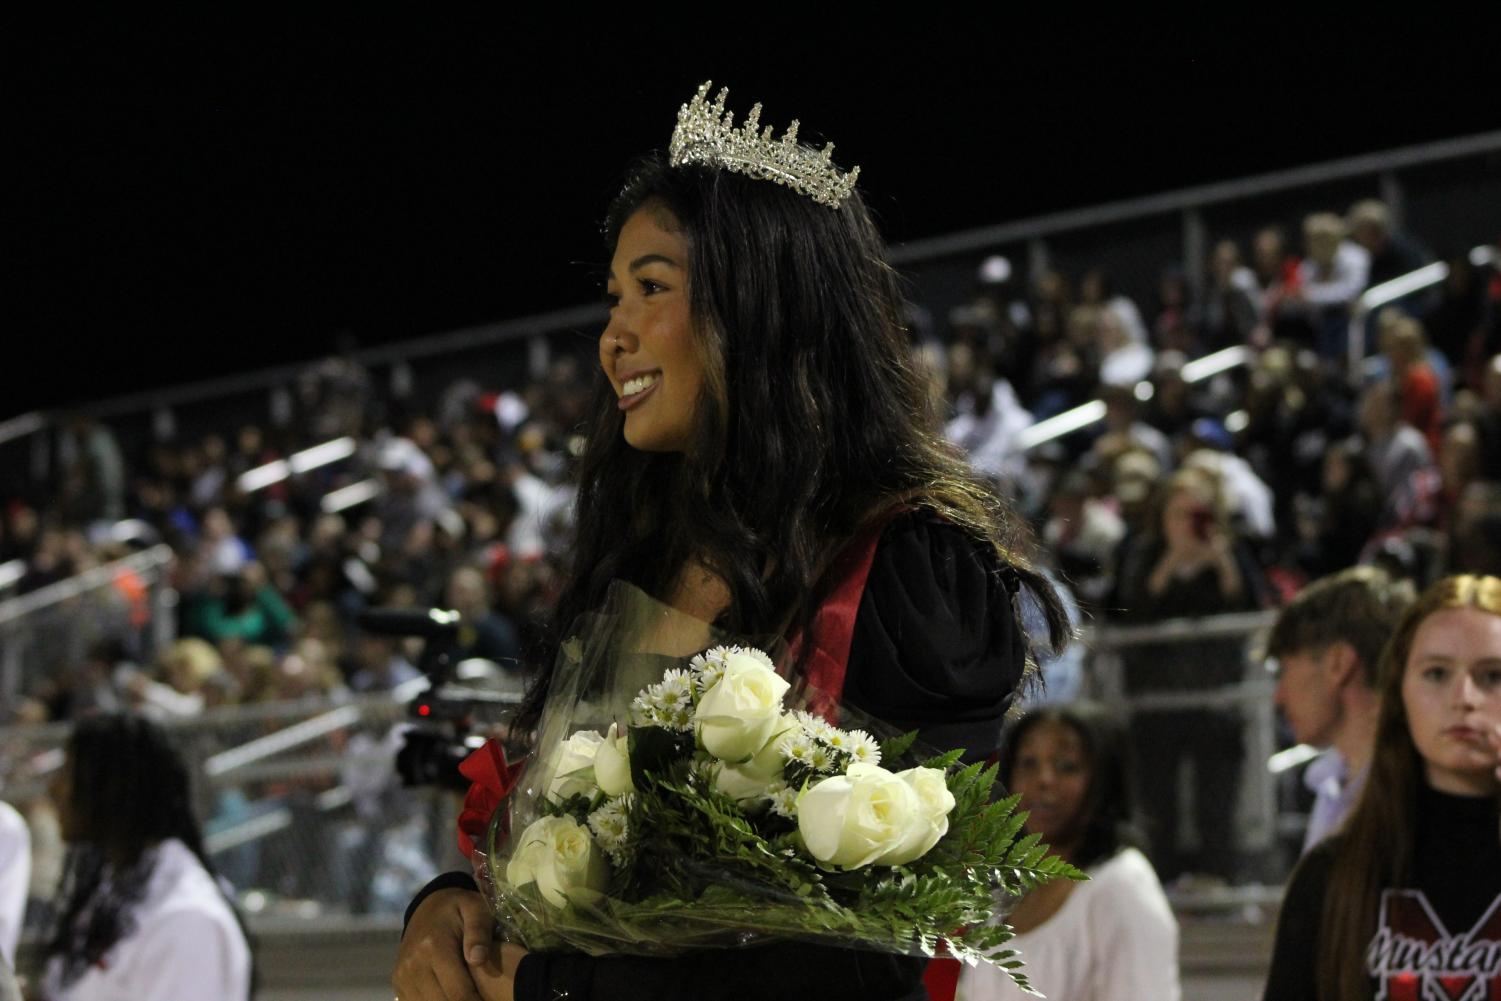 Shainah+Walker+crowned+new+Homecoming+Queen+%7C+Homecoming+Court+2022+%7C+Slideshow